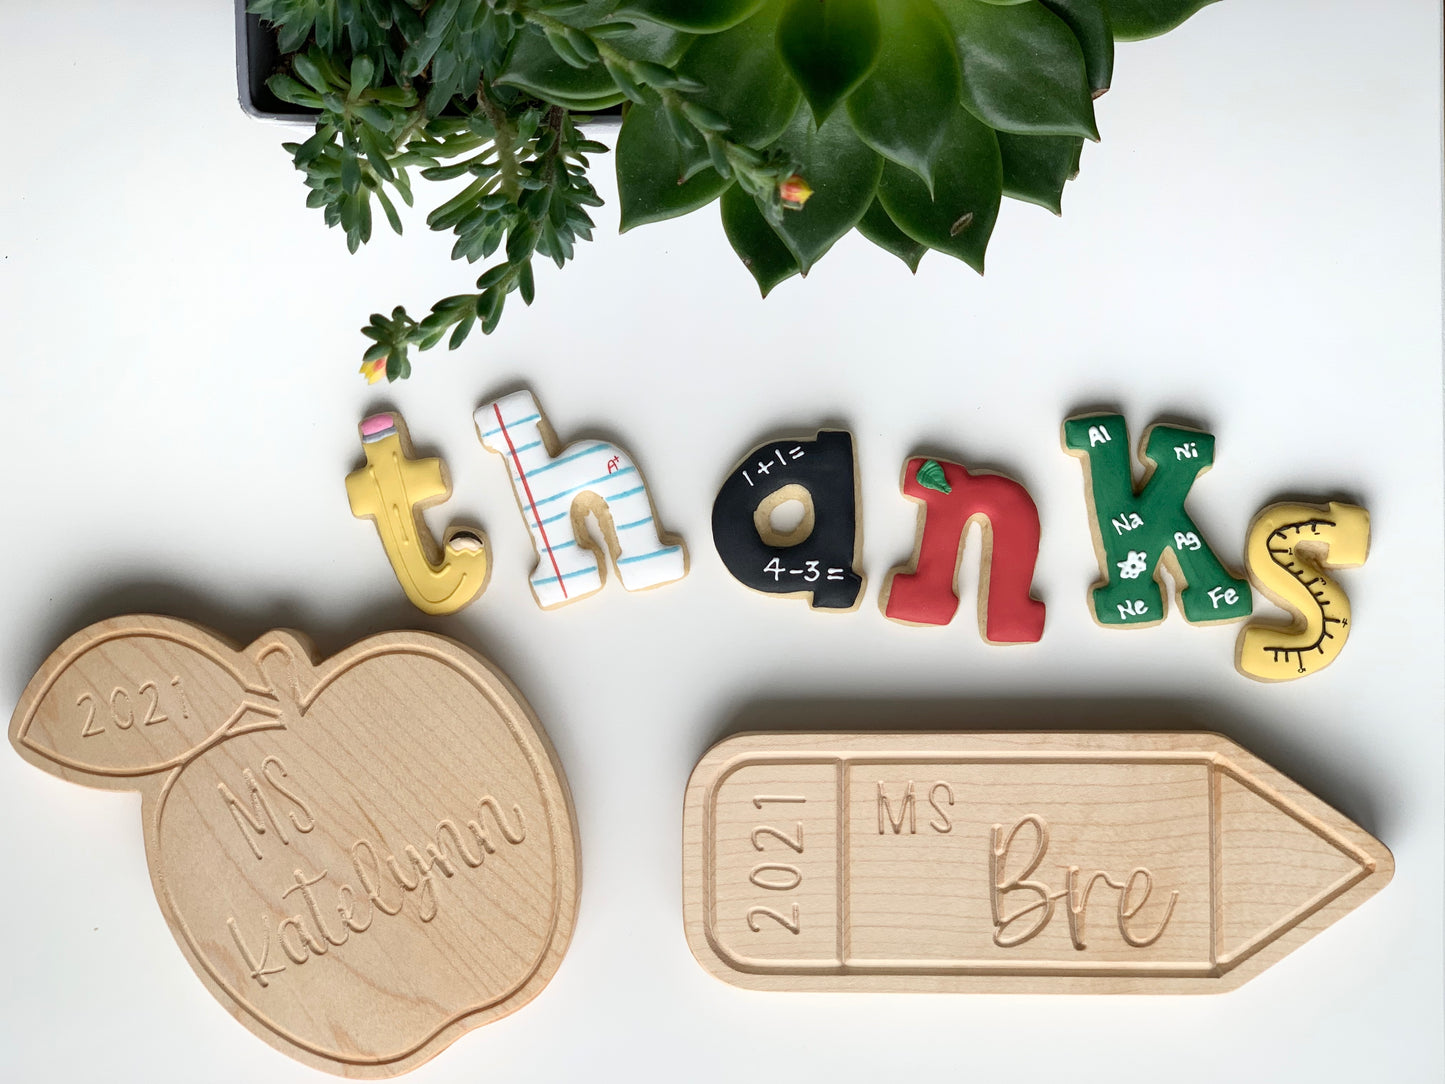 Personalized Teacher Gift - Name Plate for Desk, Wall, Door or Shelf